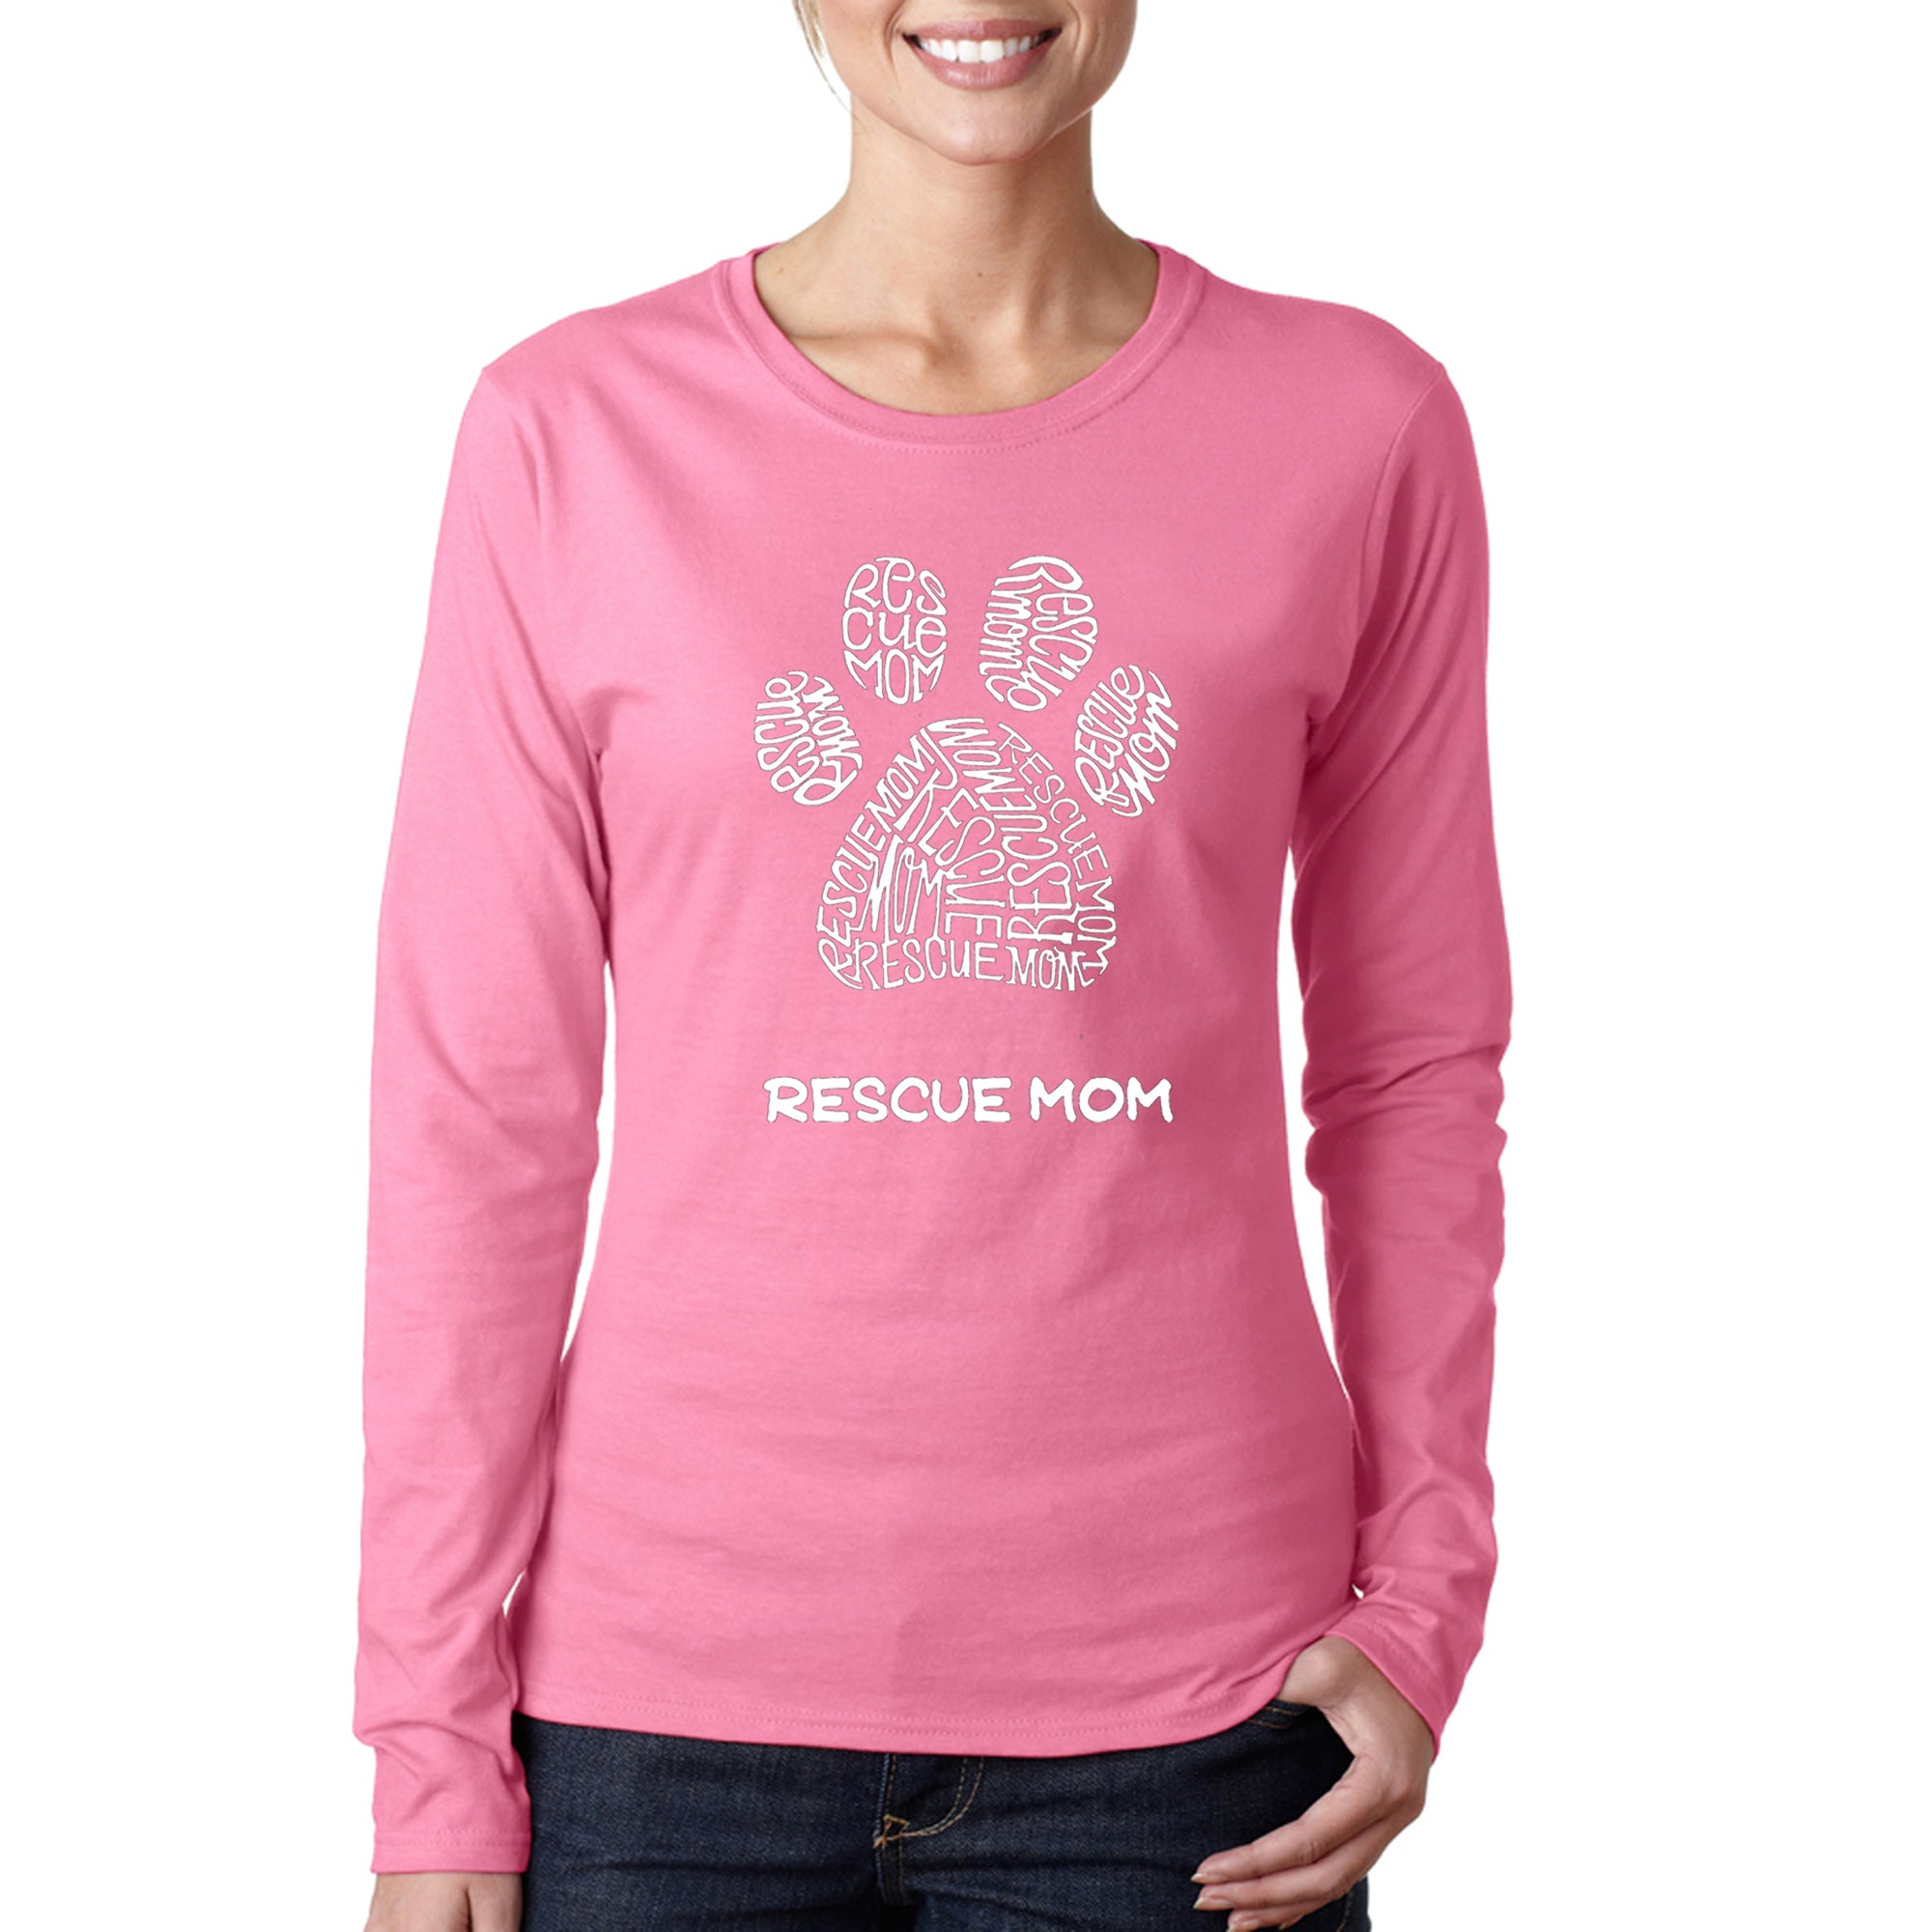 Rescue Mom - Women's Word Art Long Sleeve T-Shirt - Pink - XX-Large